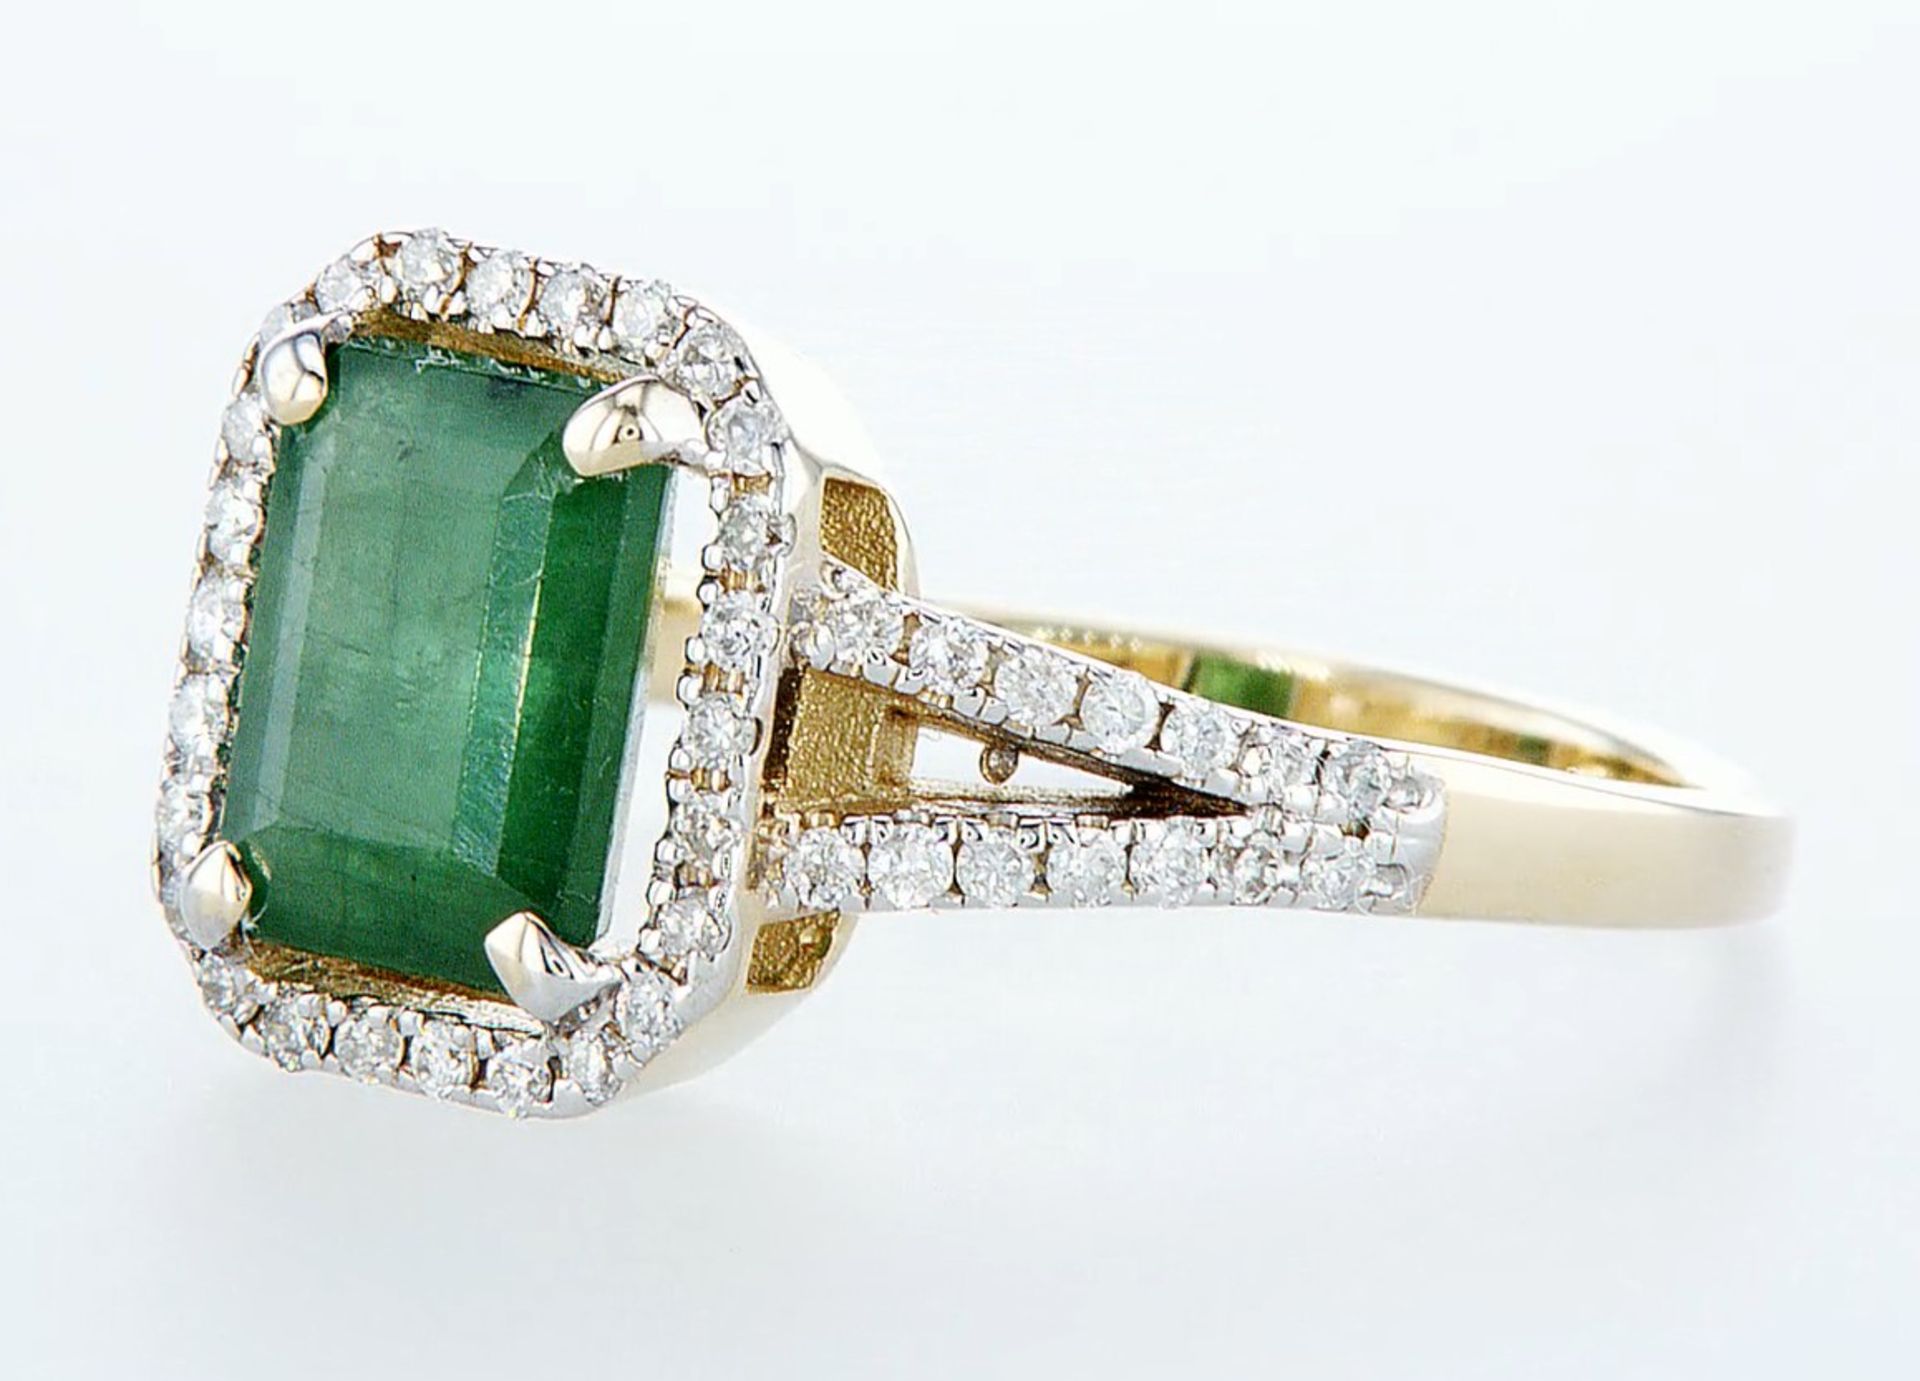 14 kt. White gold, Yellow gold - Ring - 2.01 ct Emerald - Diamonds - Image 2 of 7